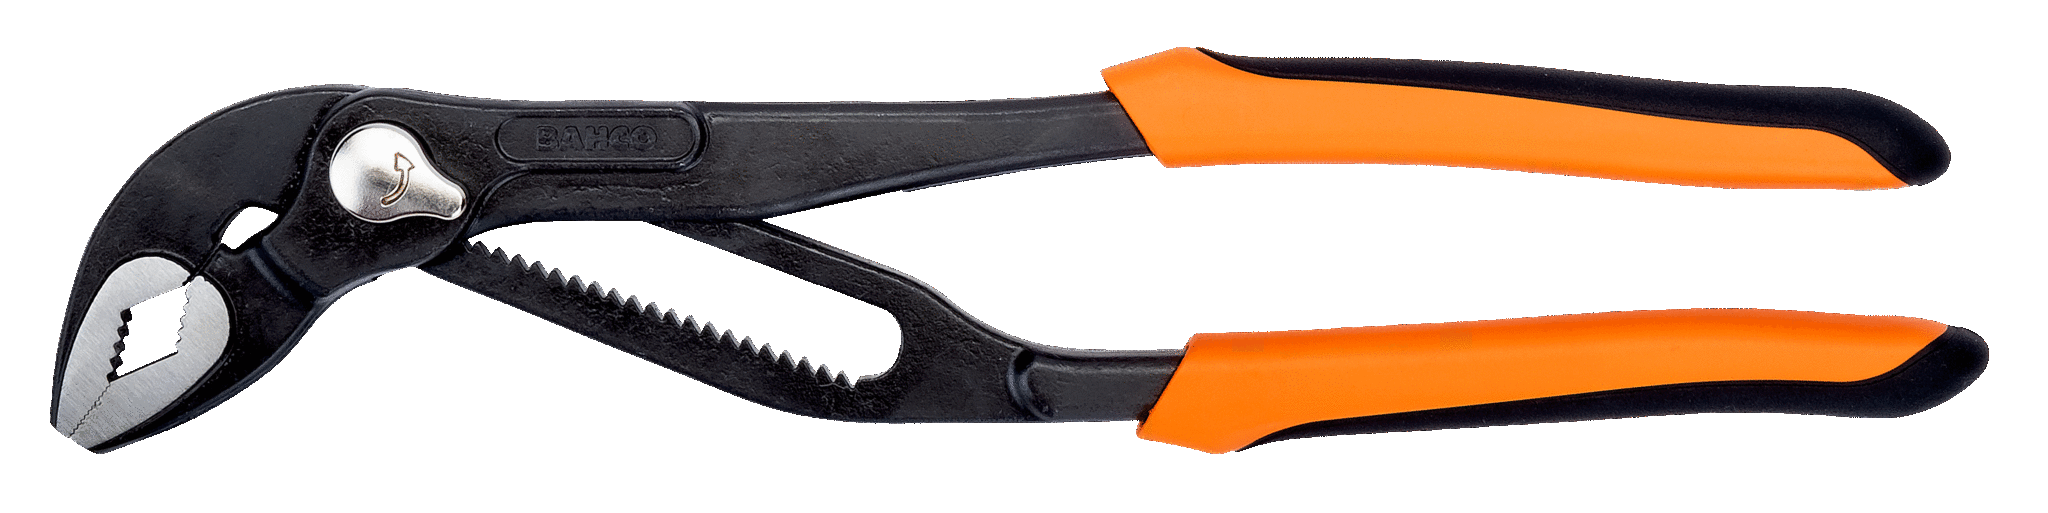 Quick Adjust Slip Joint Water Pump Pliers with Phosphate Finish - 7224 by Bahco